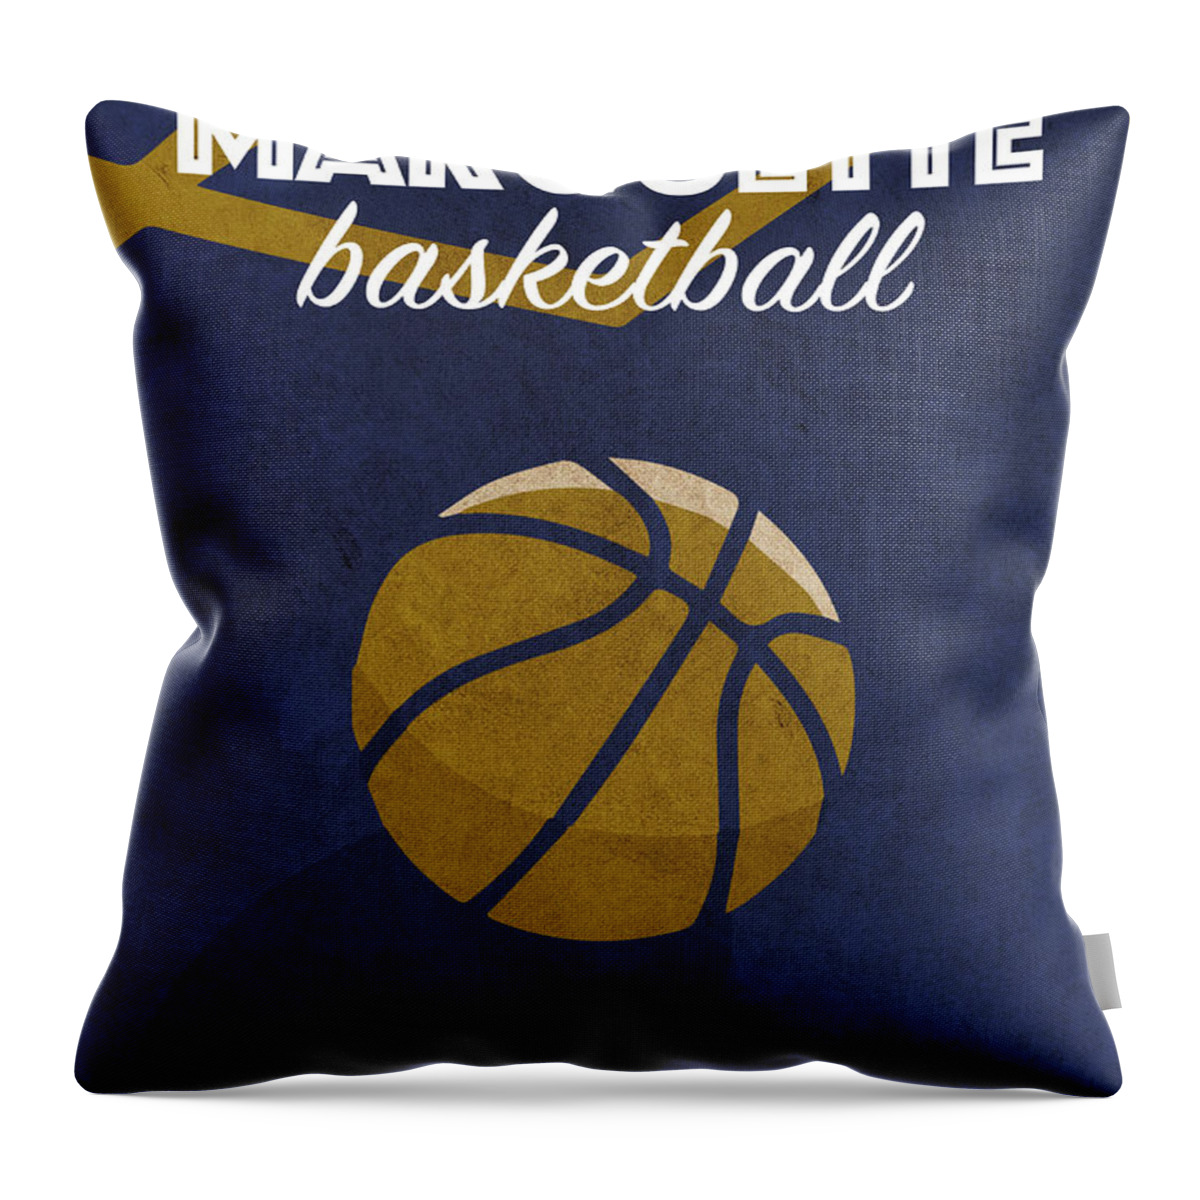 Marquette Throw Pillow featuring the mixed media Marquette College Basketball Retro Vintage University Poster Series by Design Turnpike